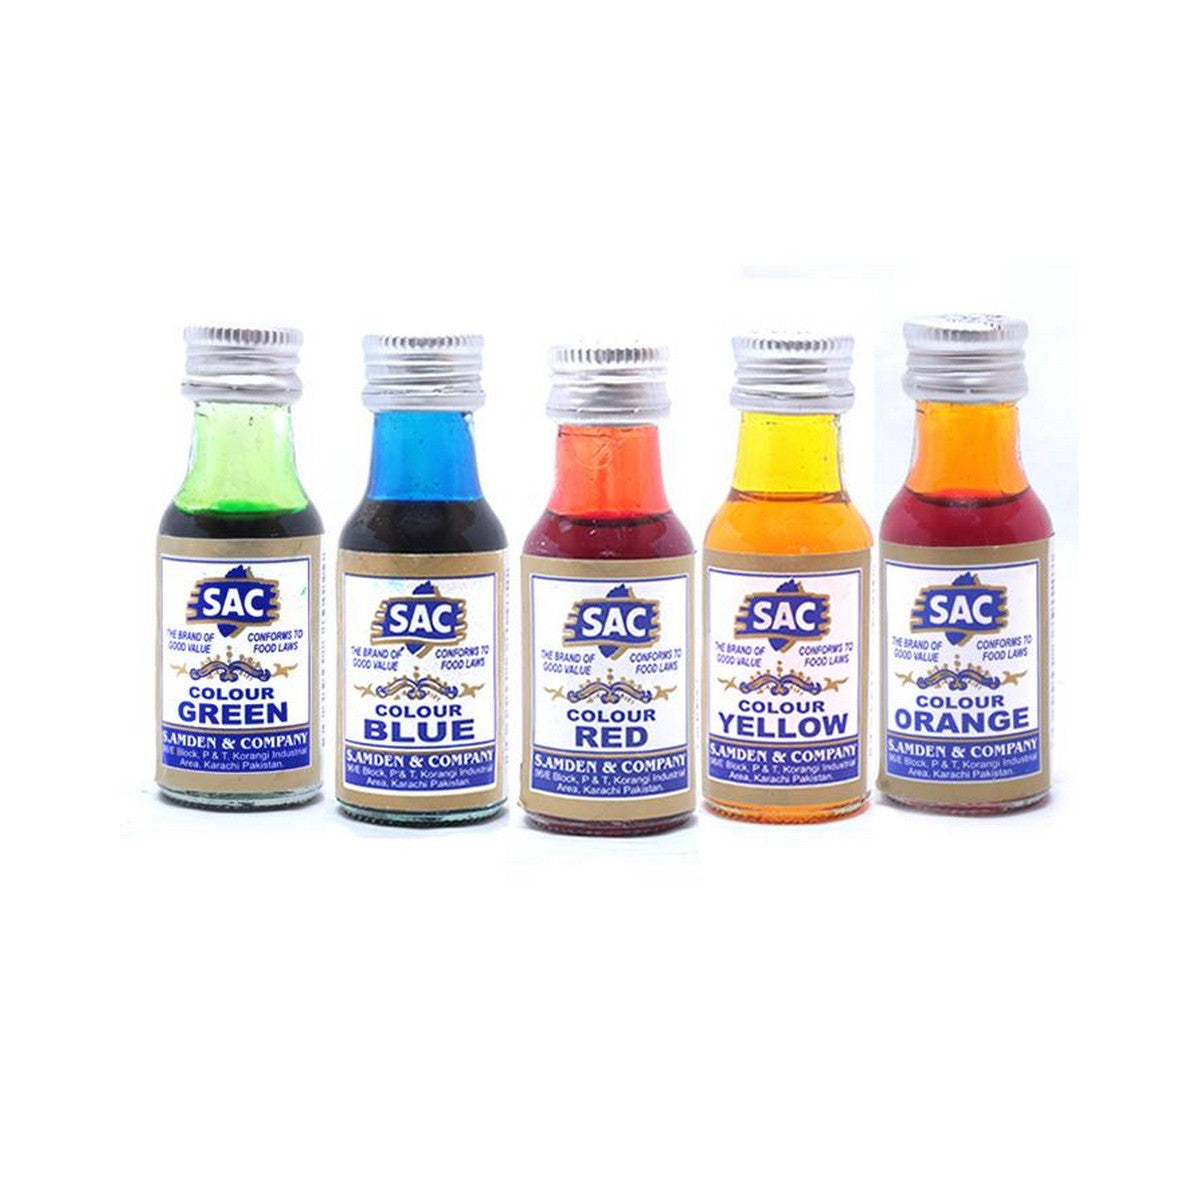 Food colors - Green, Blue, Red, Yellow, Orange - Pack of 5 25ml